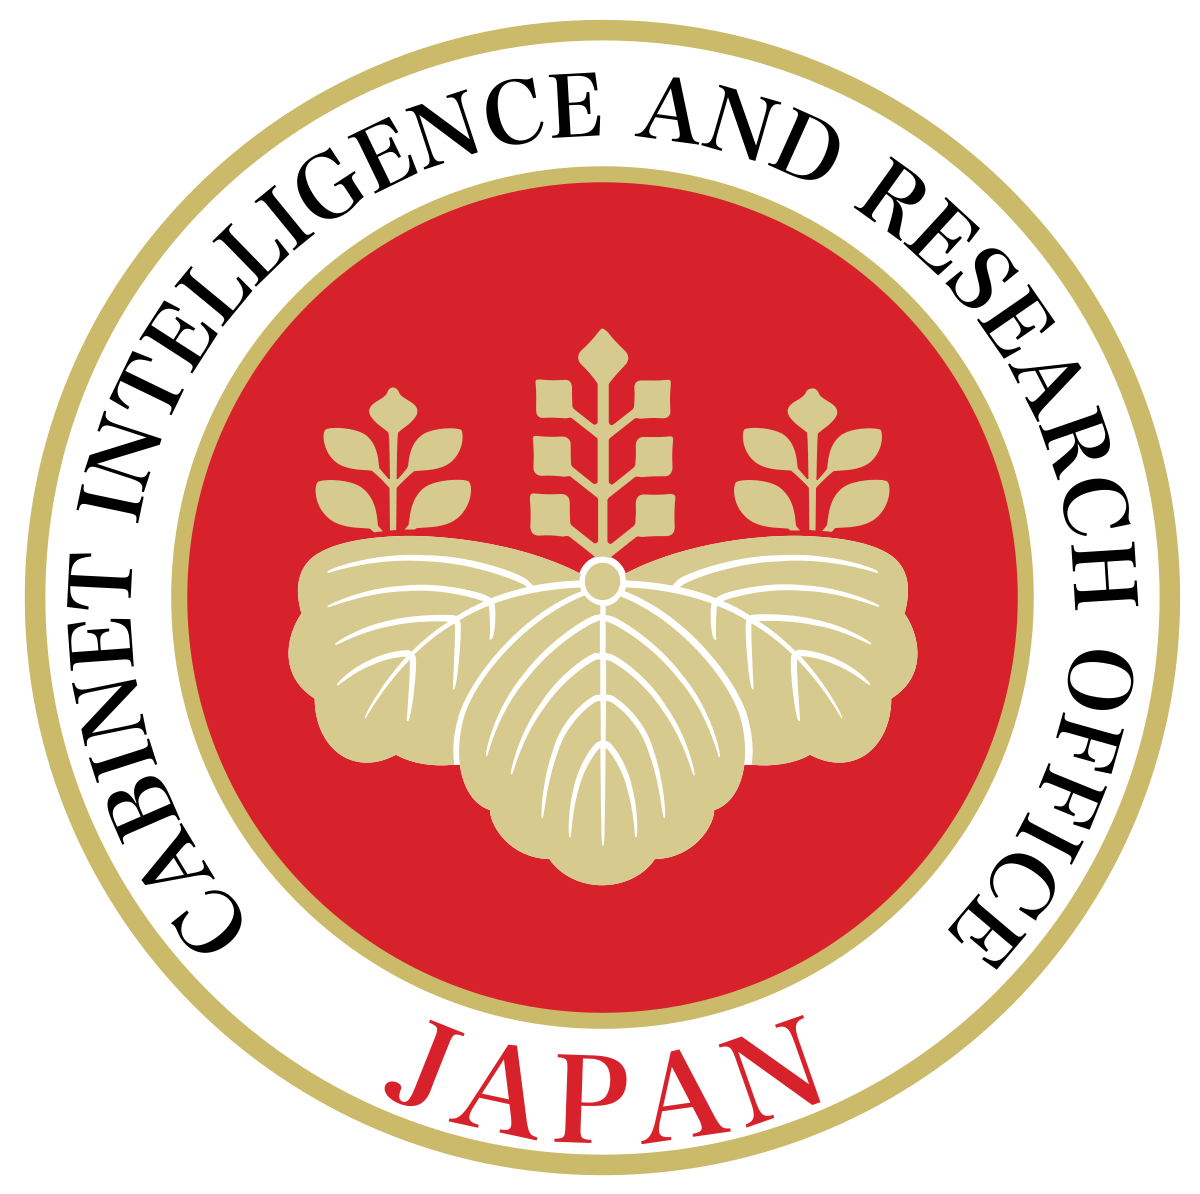 Cabinet Intelligence and Research Office - Wikipedia